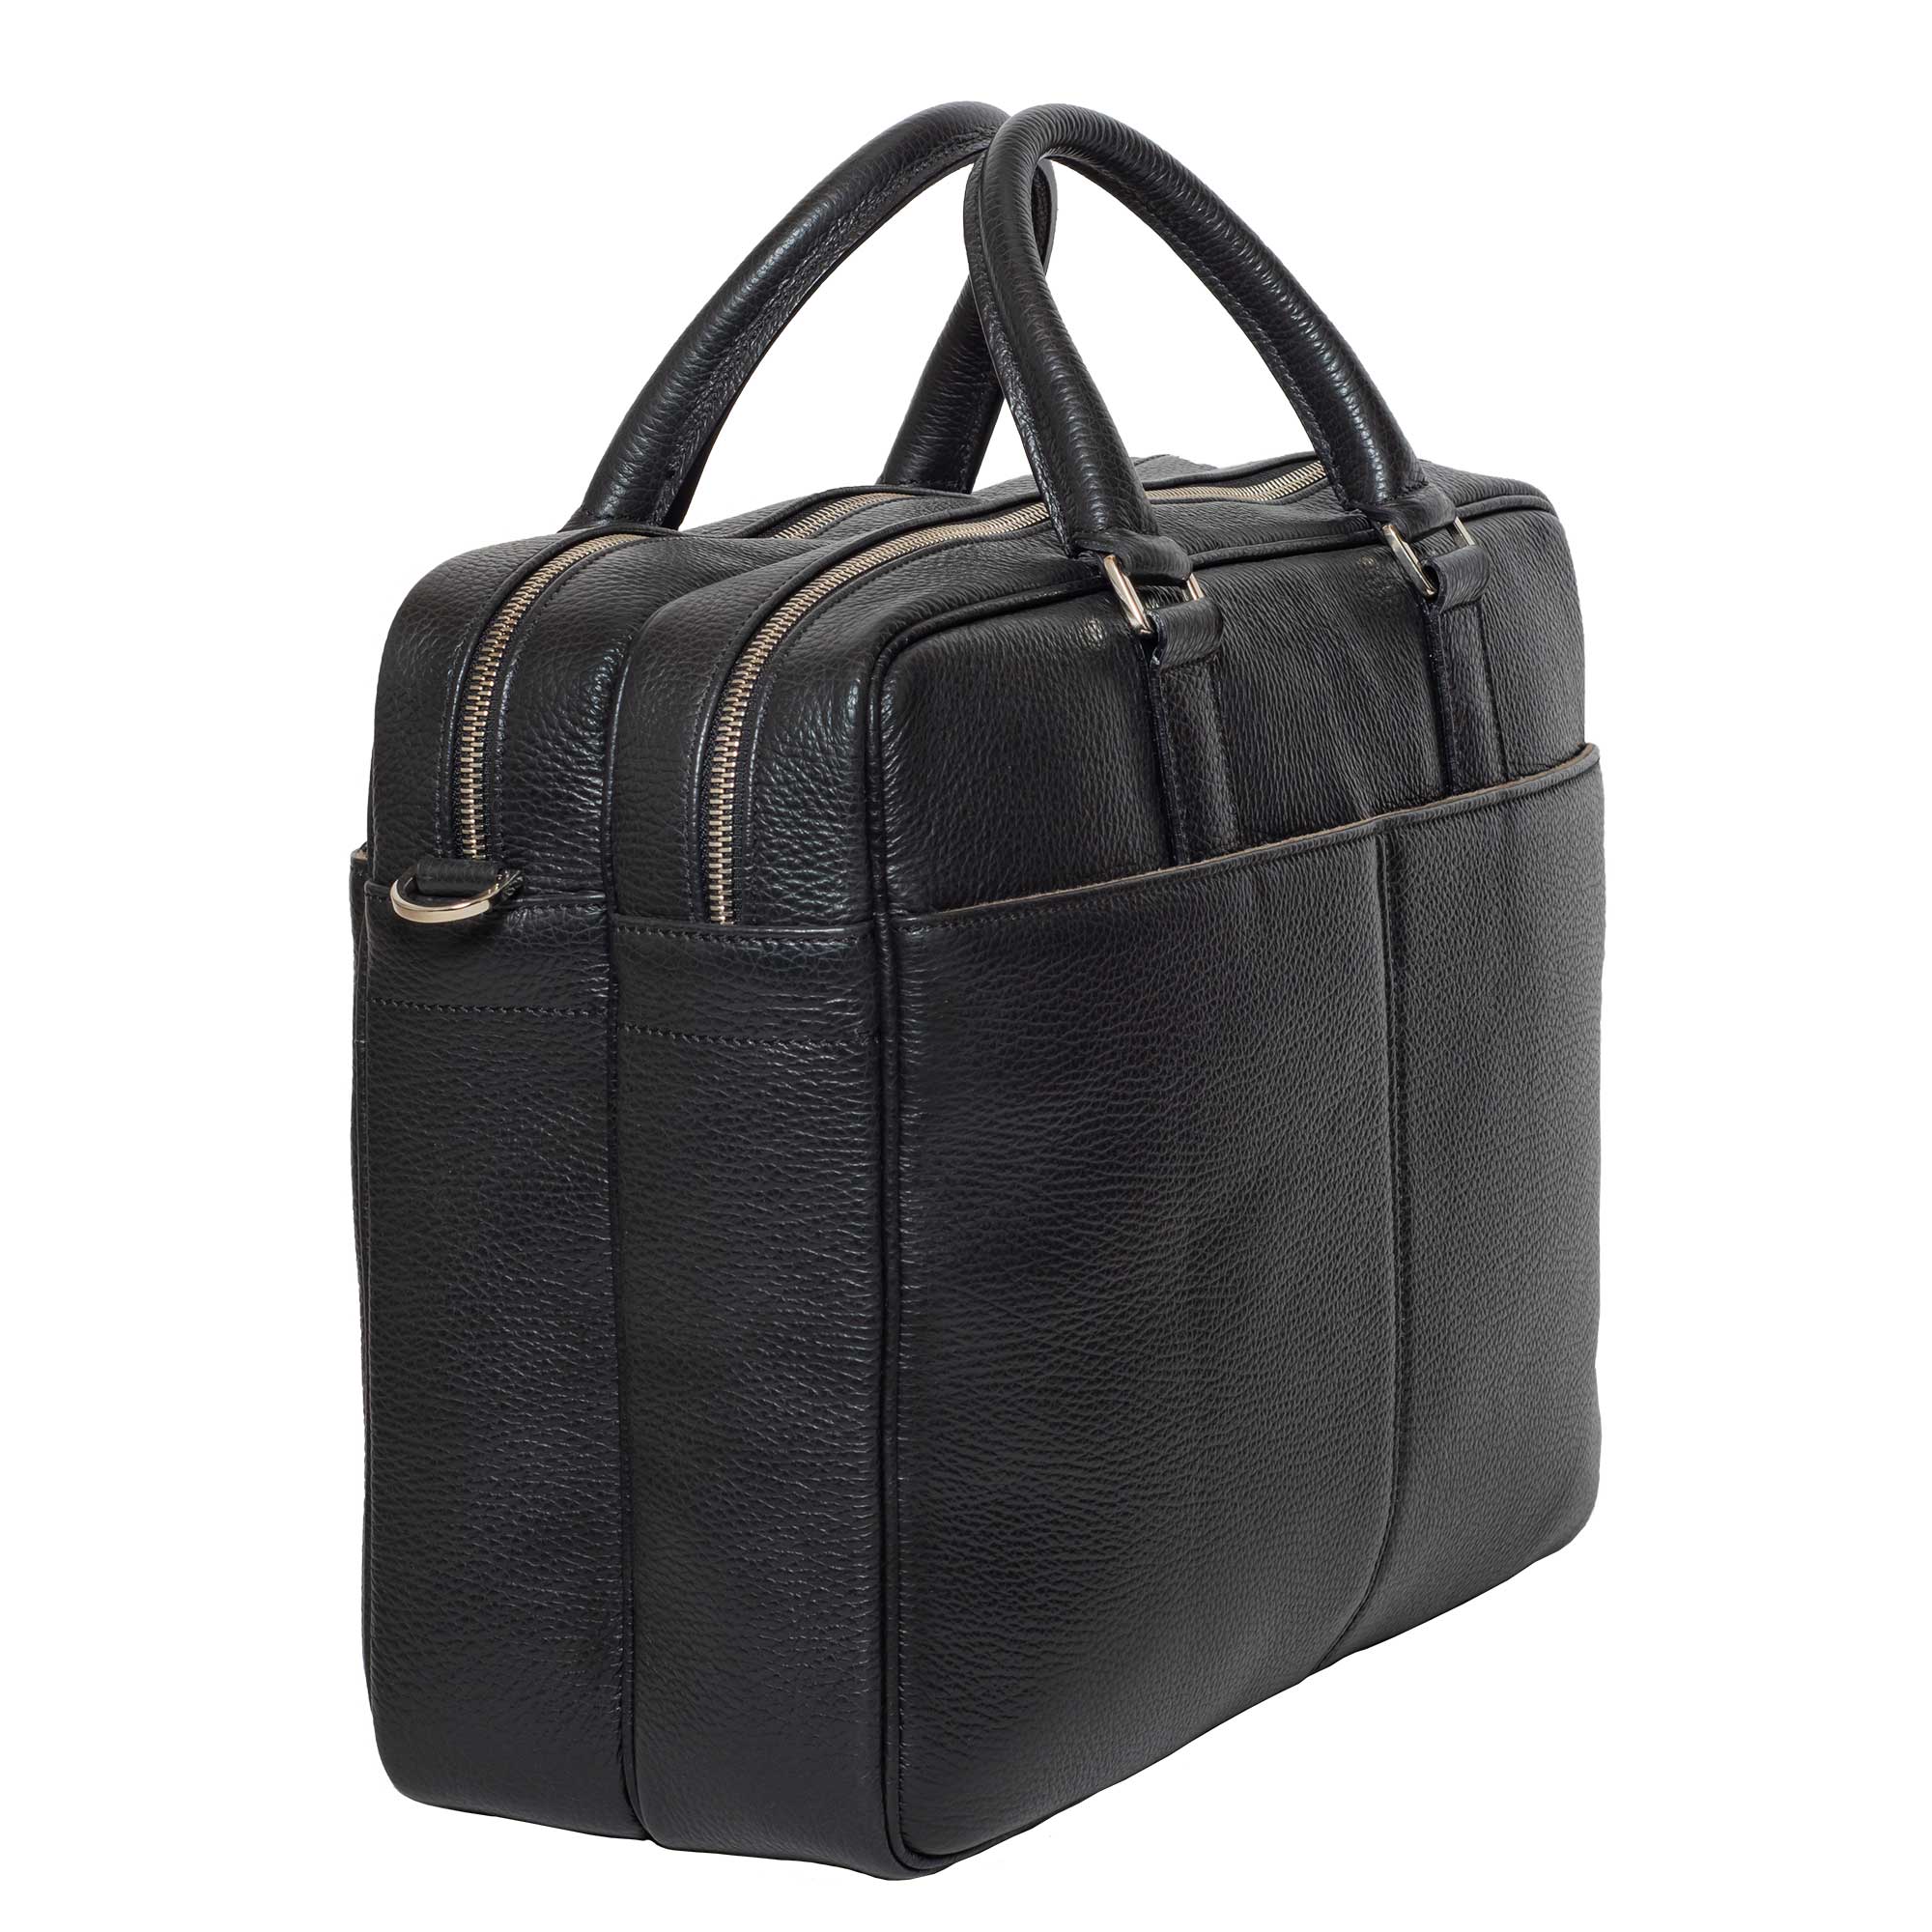 DiLoro Italian Leather Briefcases for Men | Made in Italy - Back, side view with two outside pockets